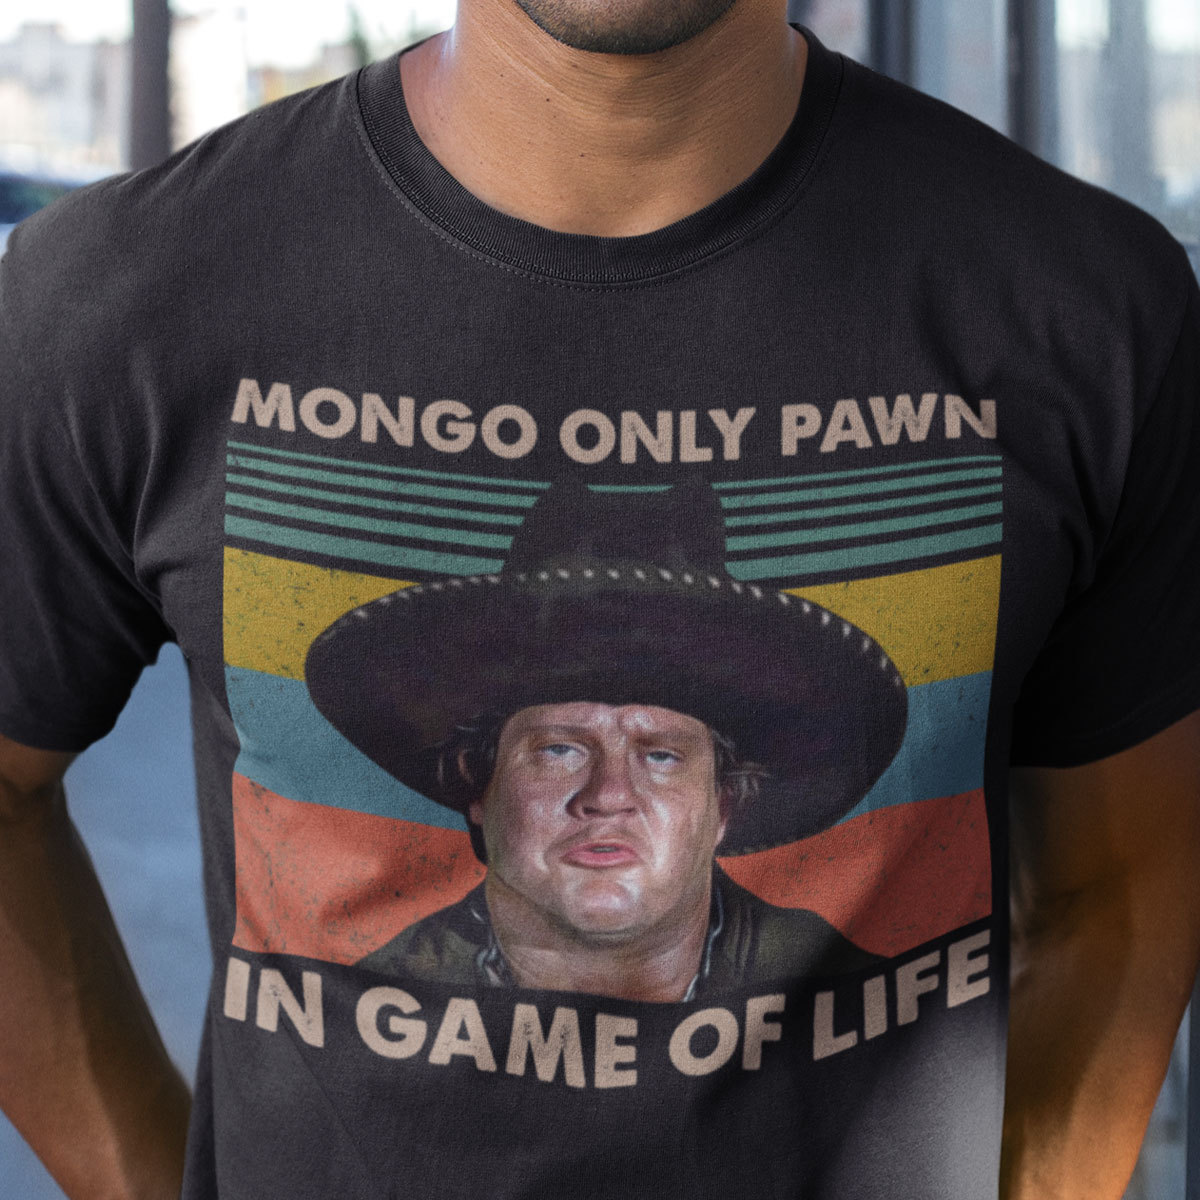 Mongo only pawn in game of life - Blazing saddle